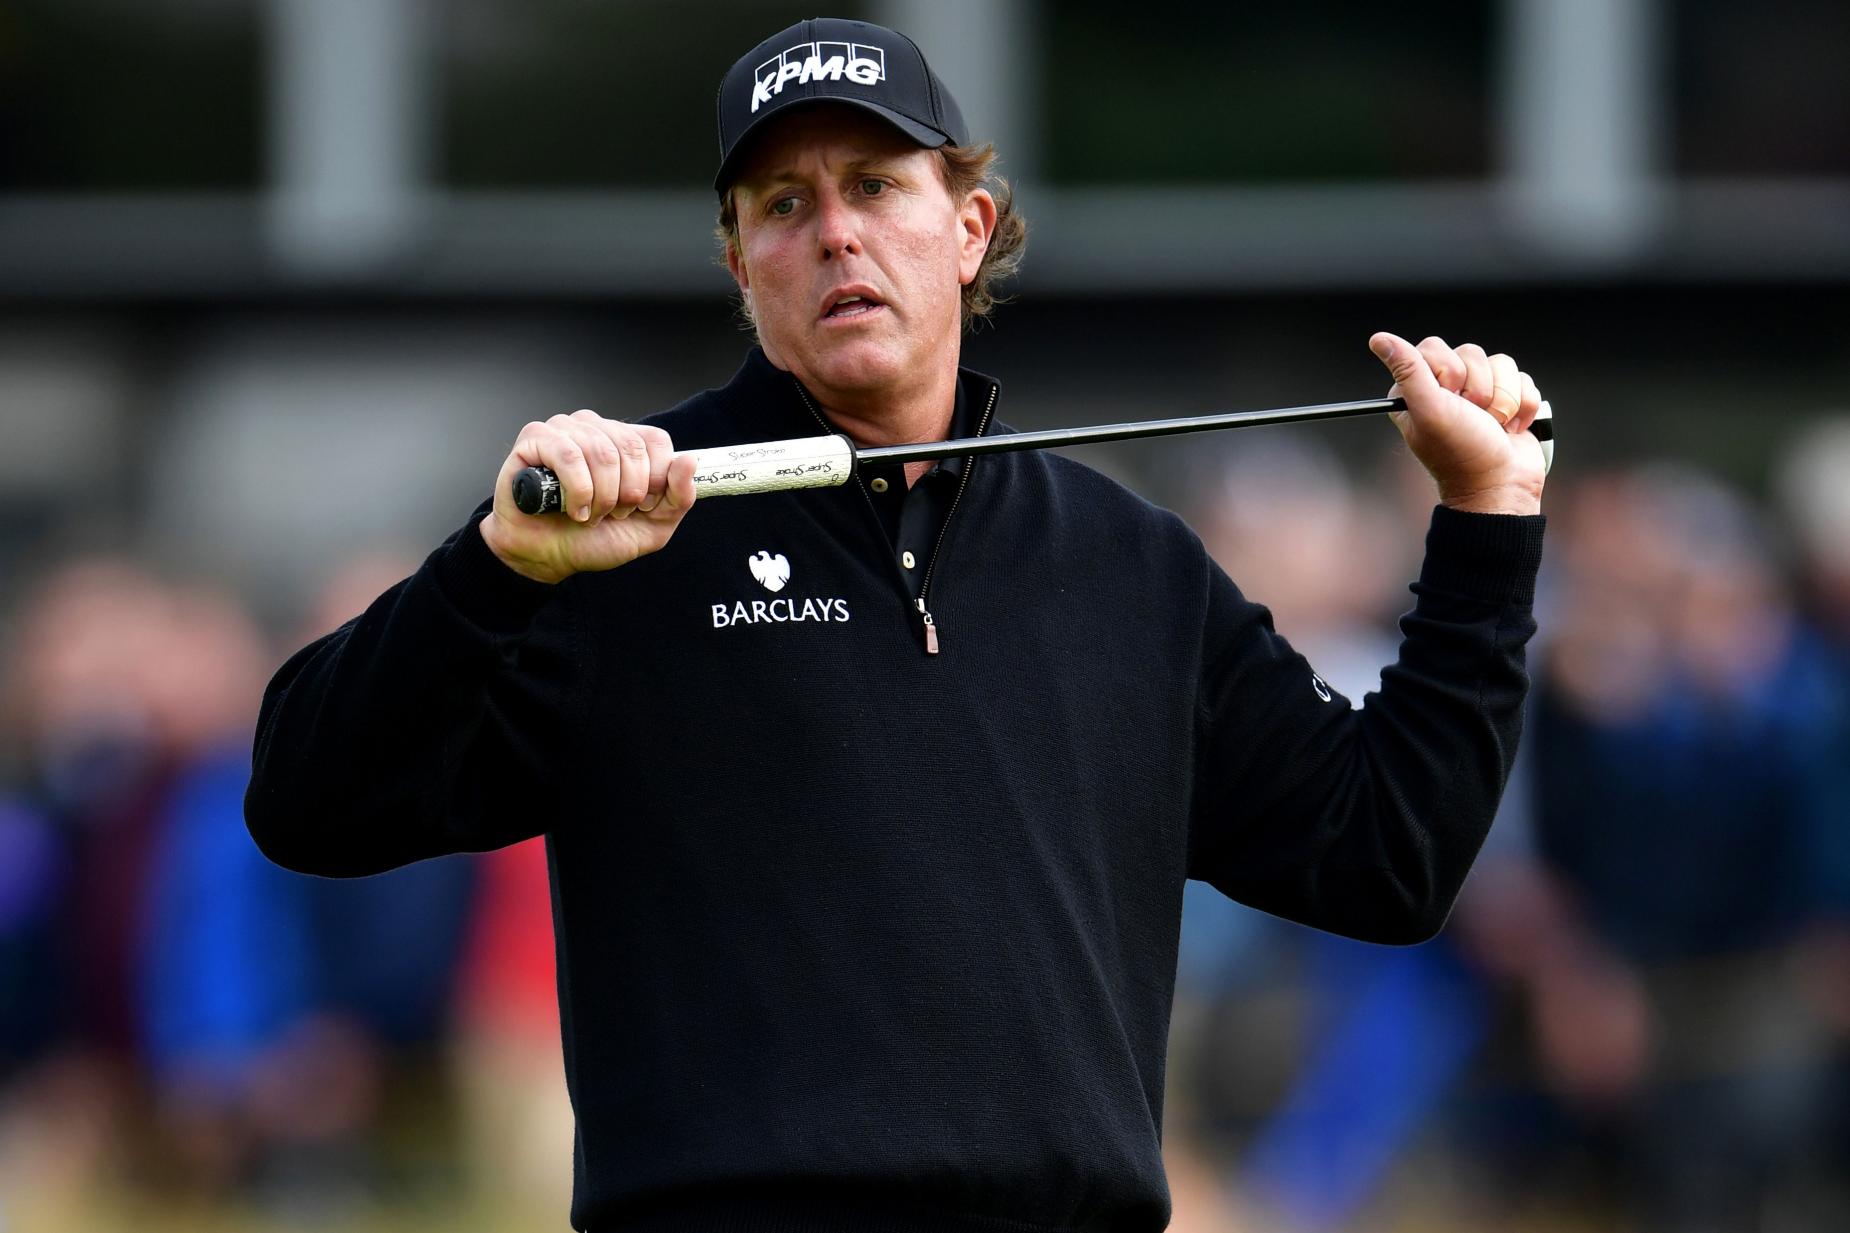 Phil Mickelson didn't let age creep up on him Sunday at the British